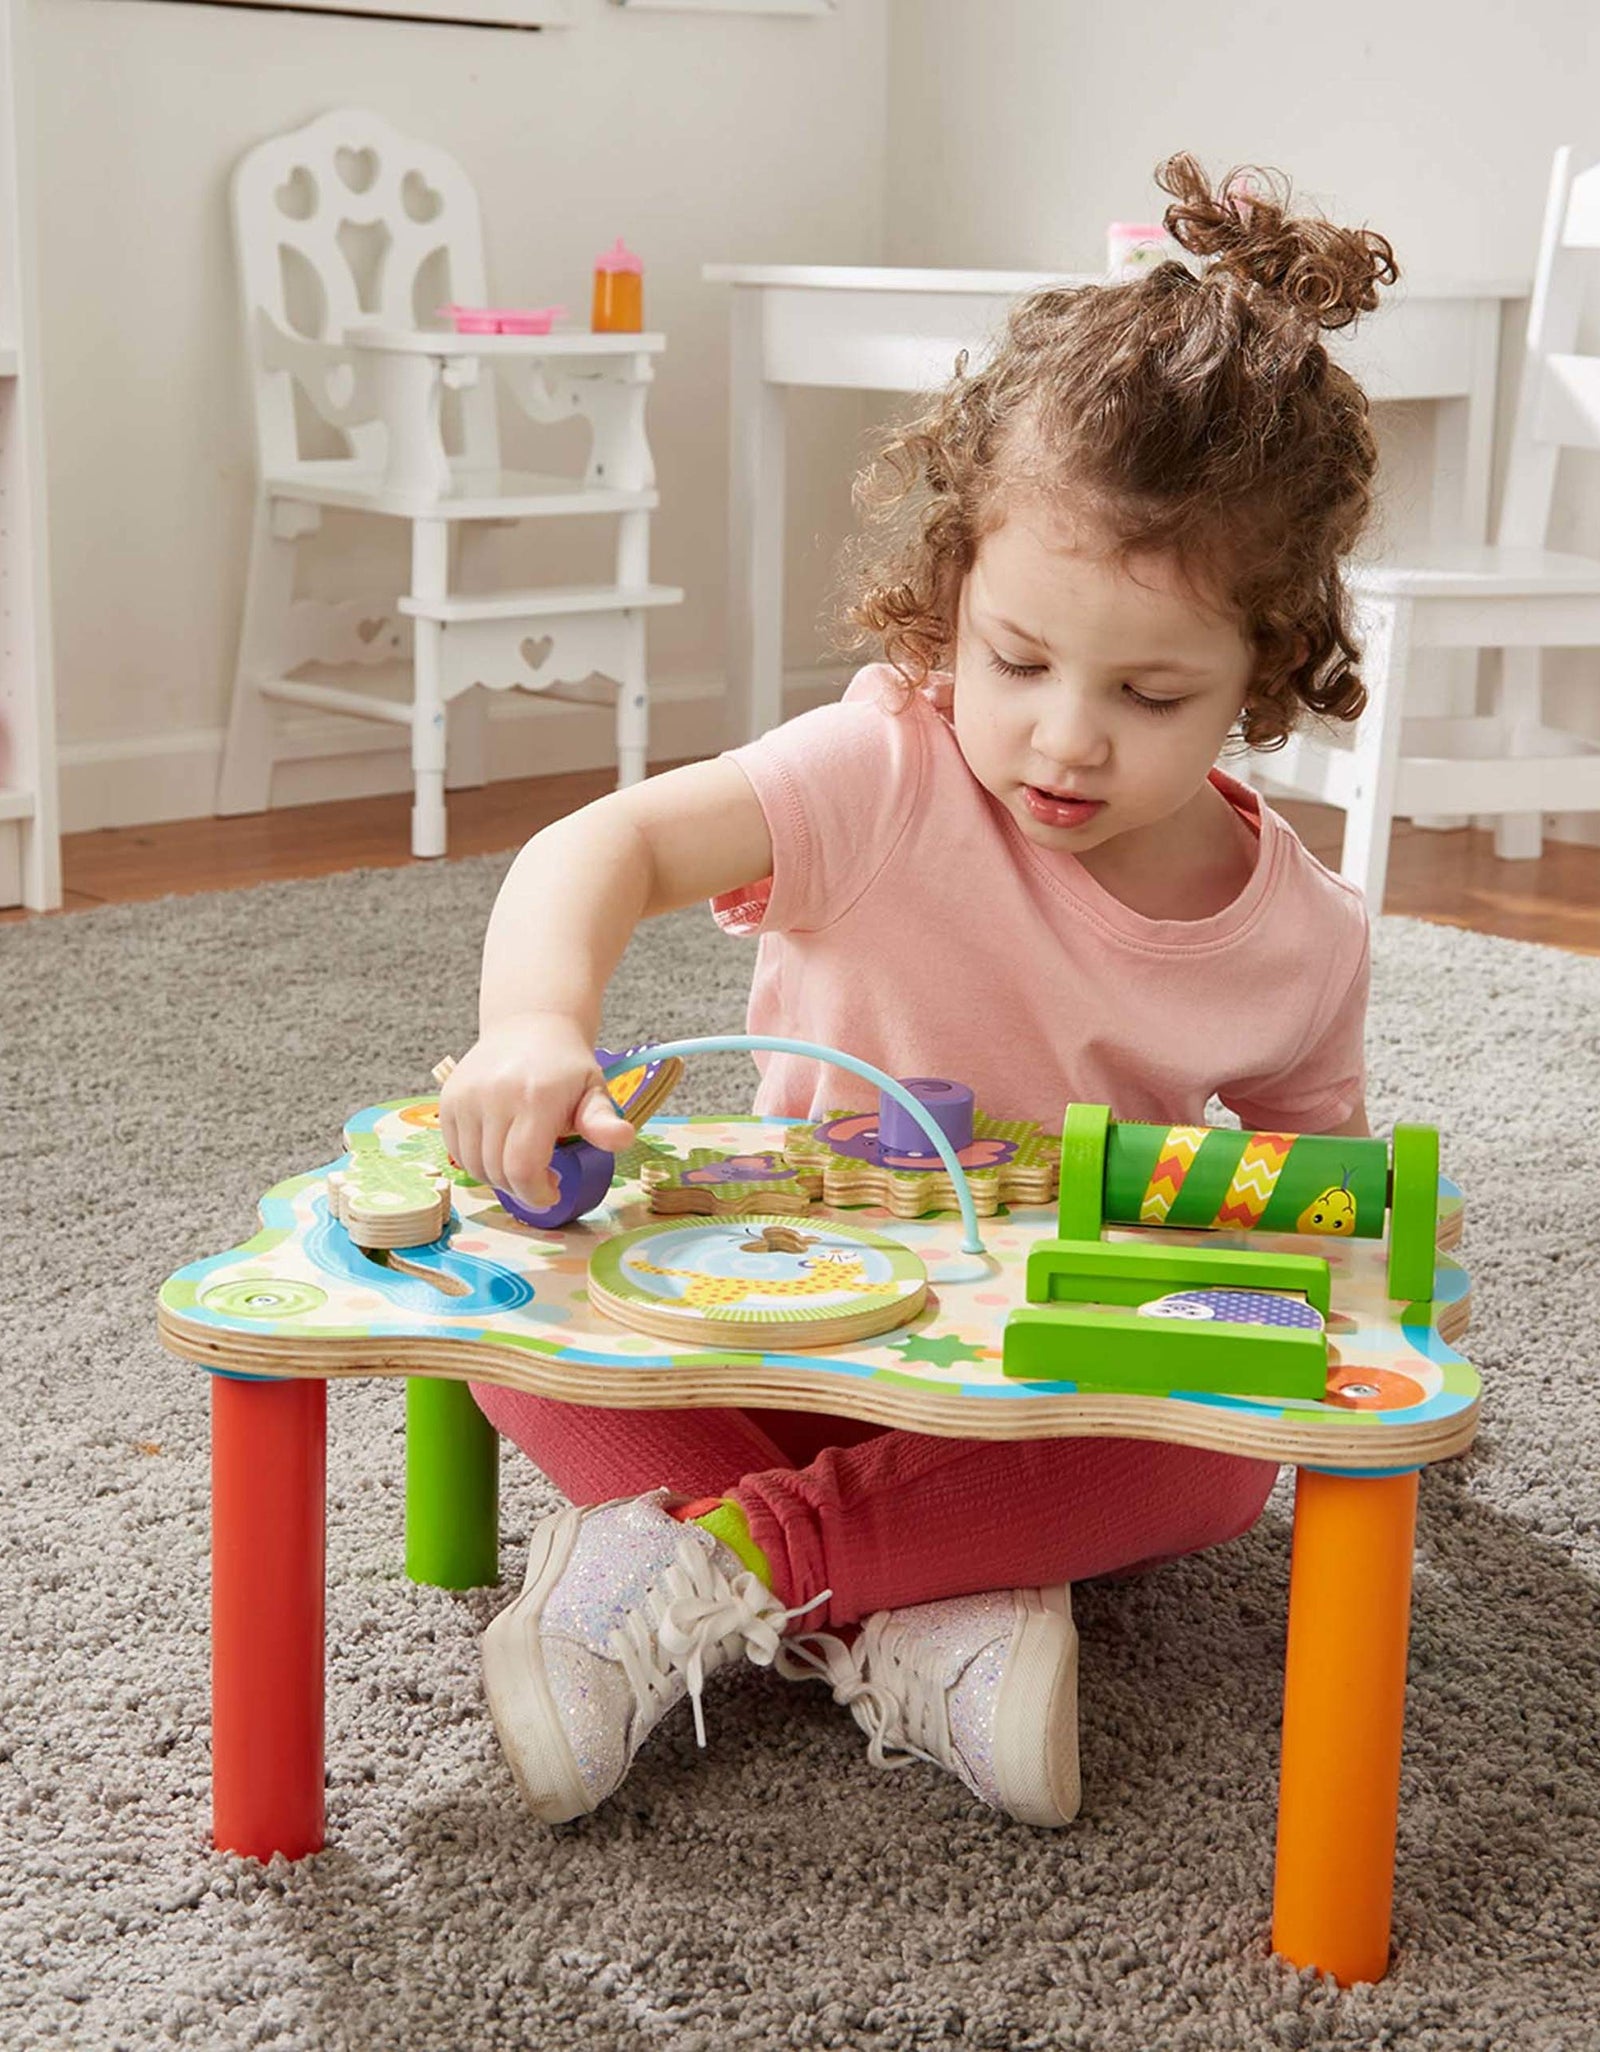 Melissa & Doug First Play Children’s Jungle Wooden Activity Table for Toddlers